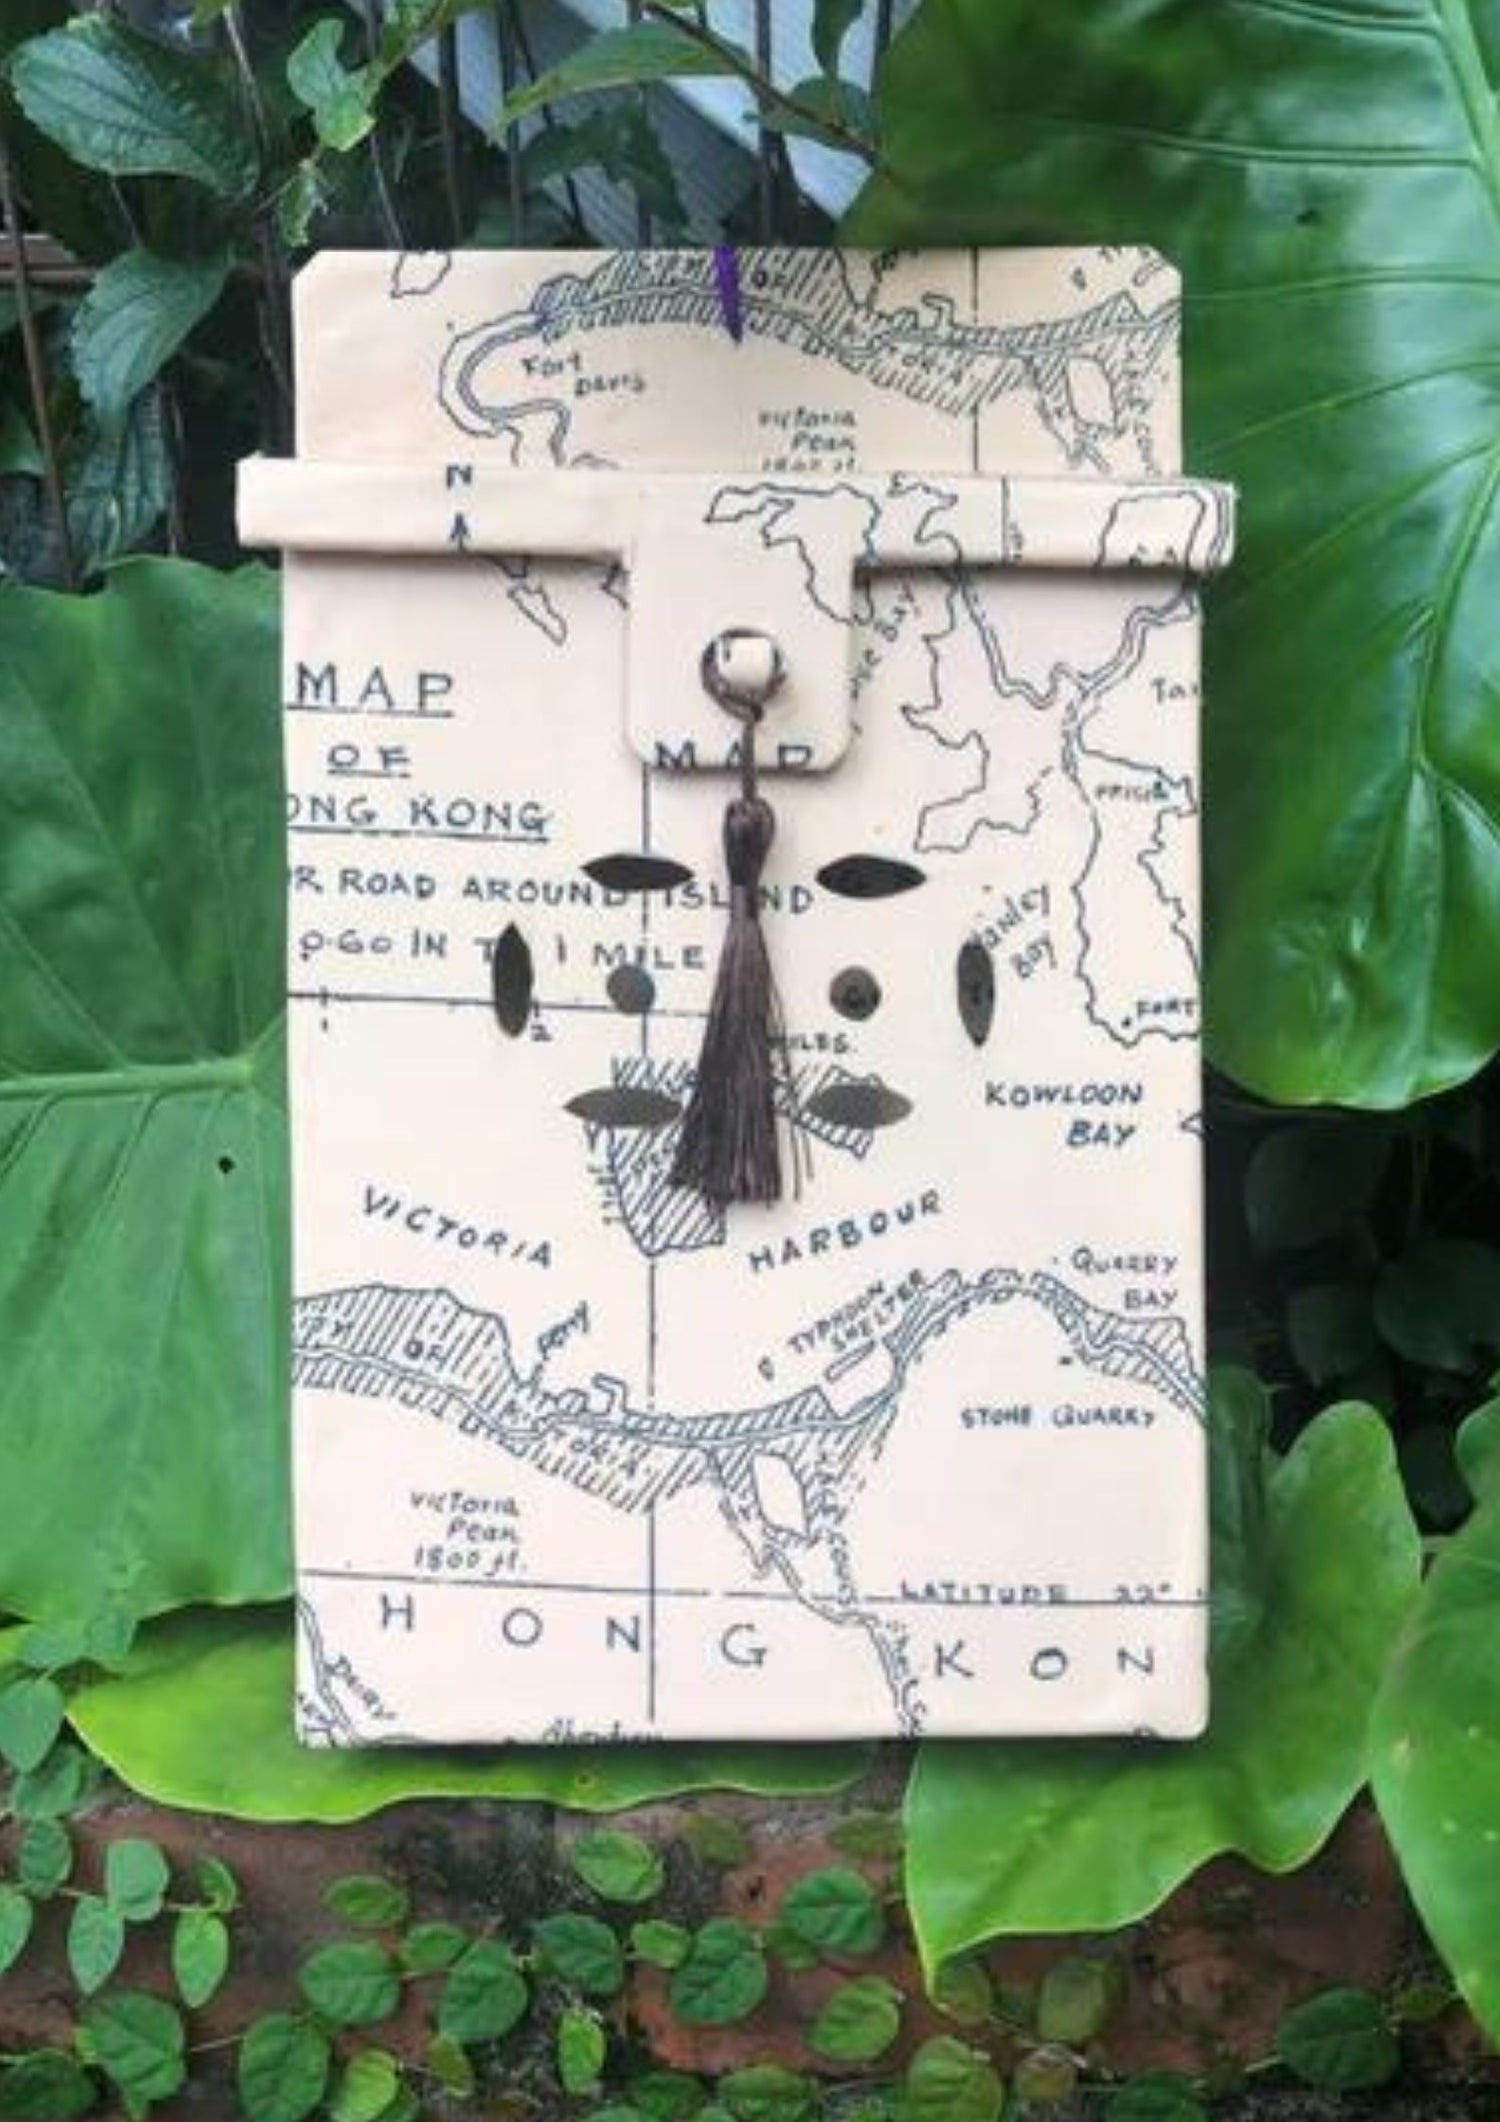 UPCYCLED TRADITIONAL CHINESE LETTERBOXES